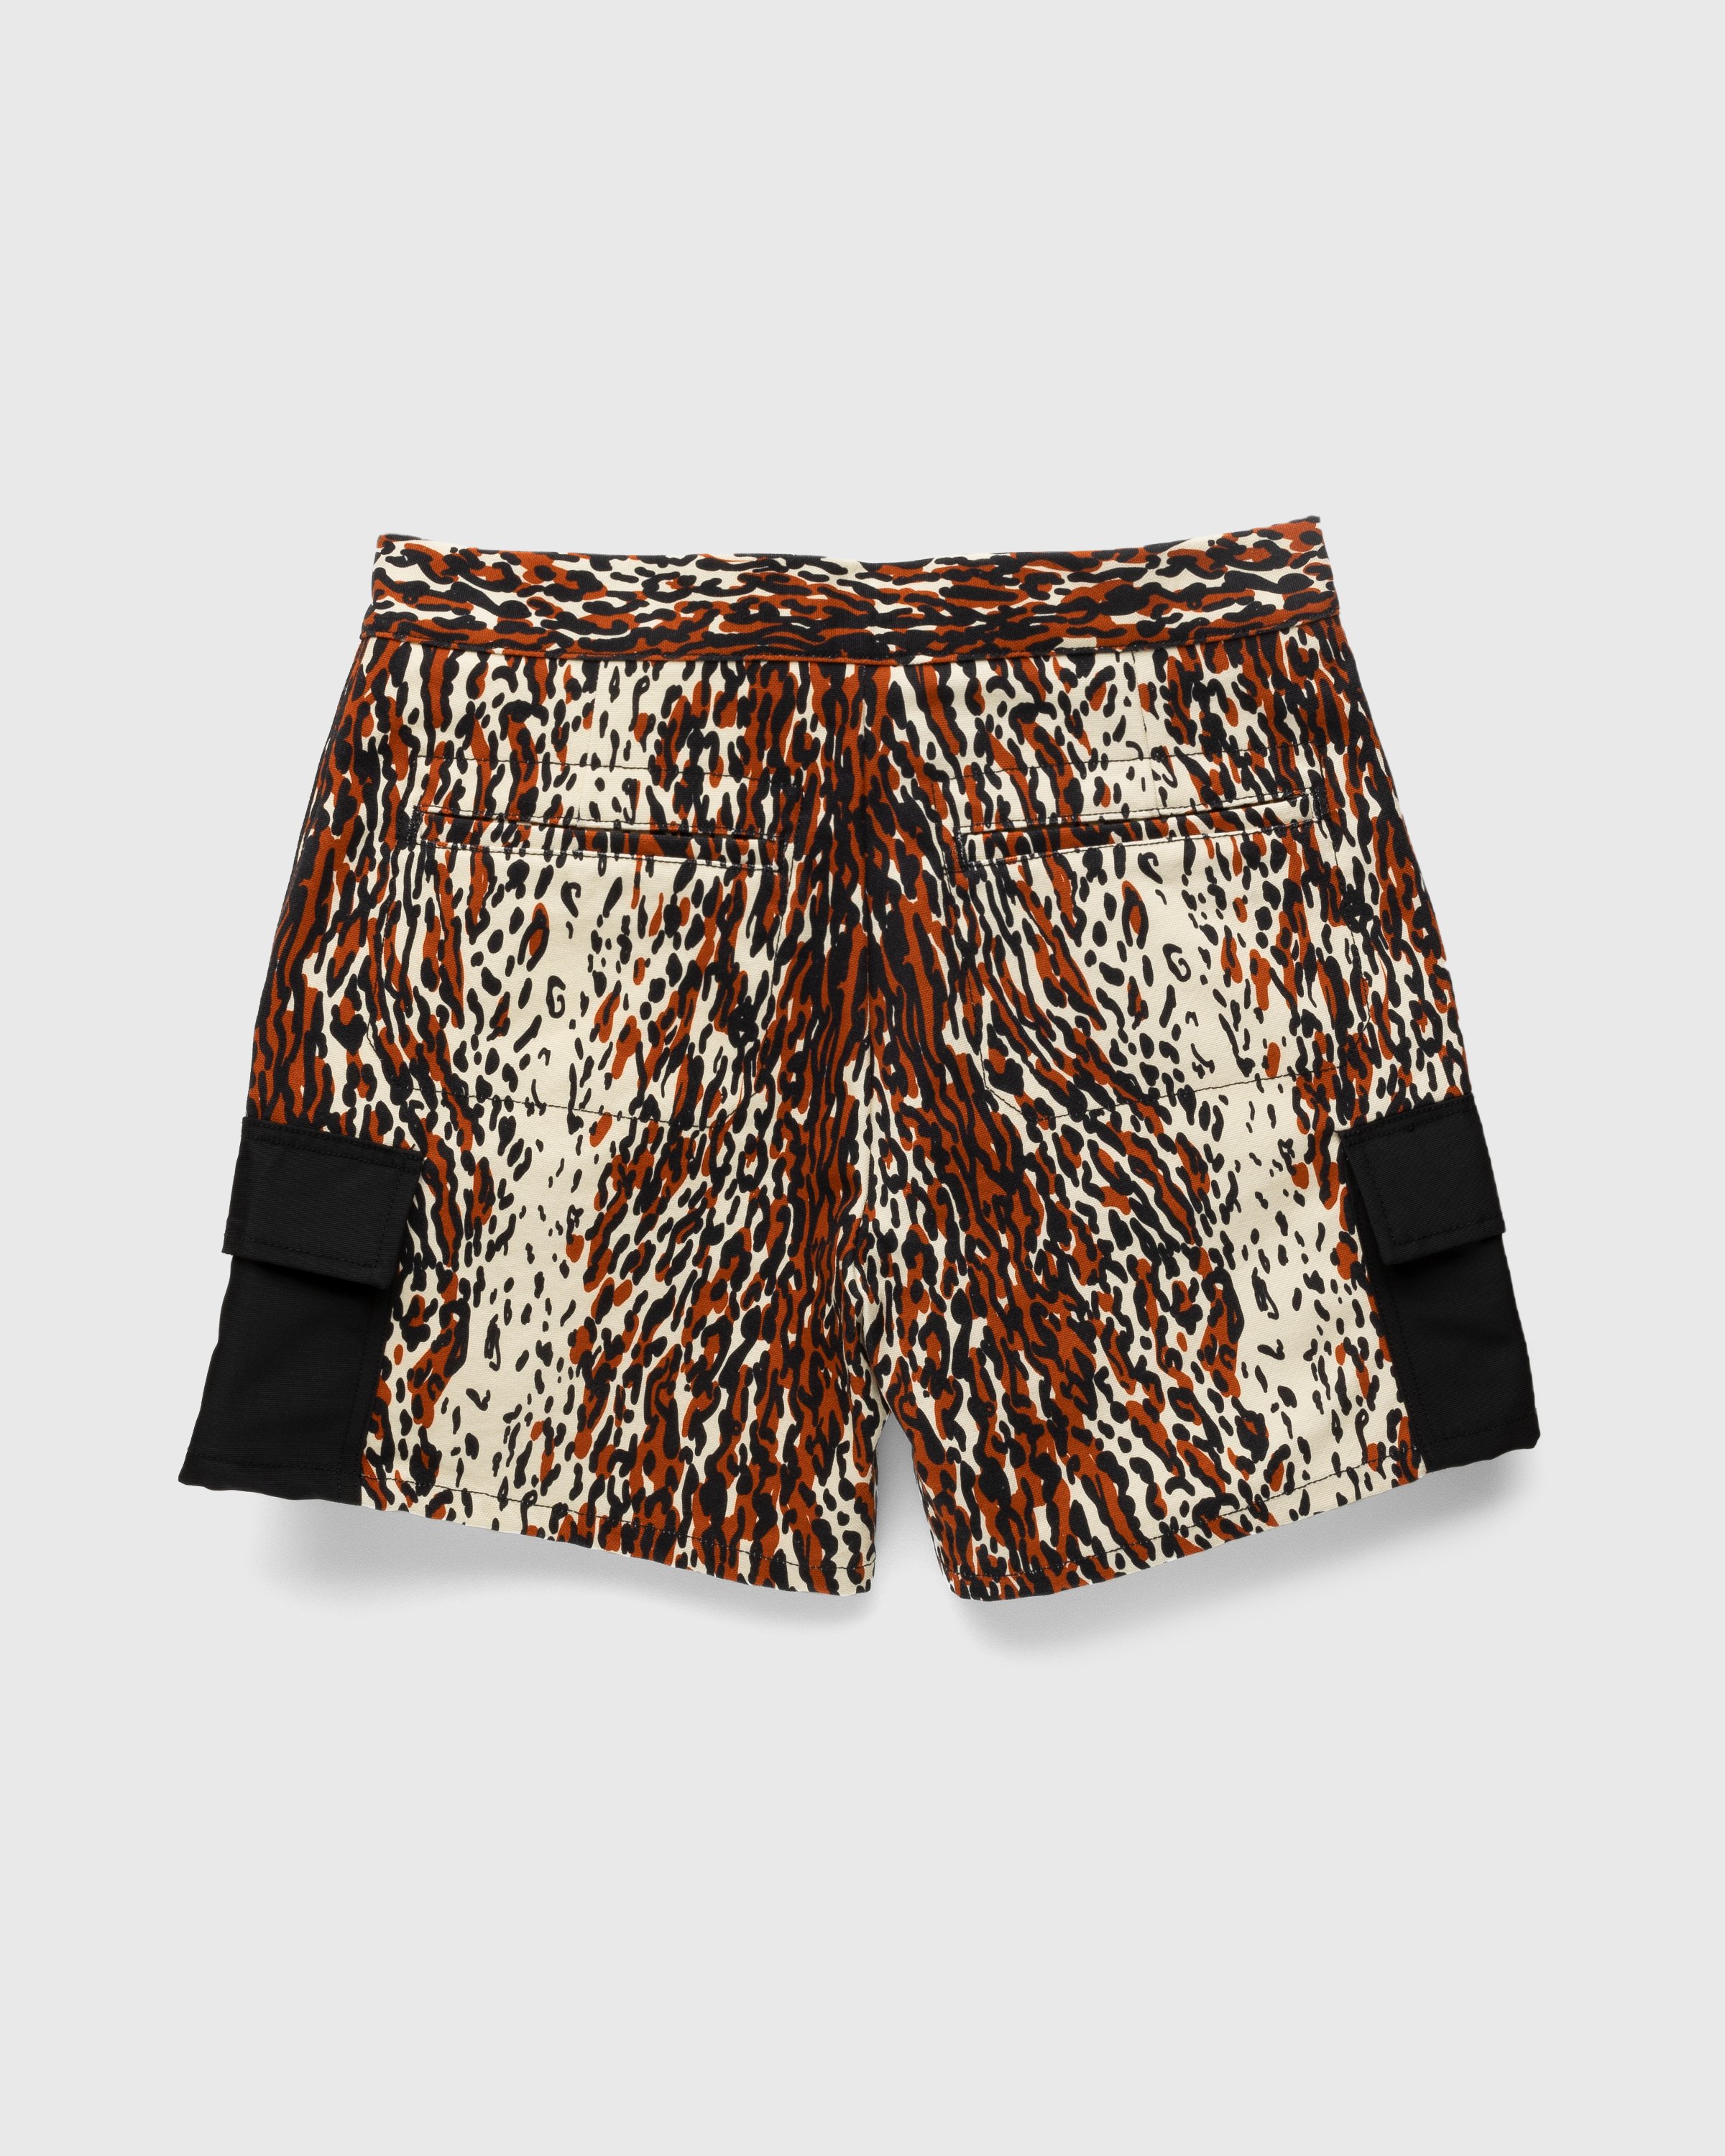 Phipps - Action Shorts Printed Canvas Leopard - Clothing - Brown - Image 2